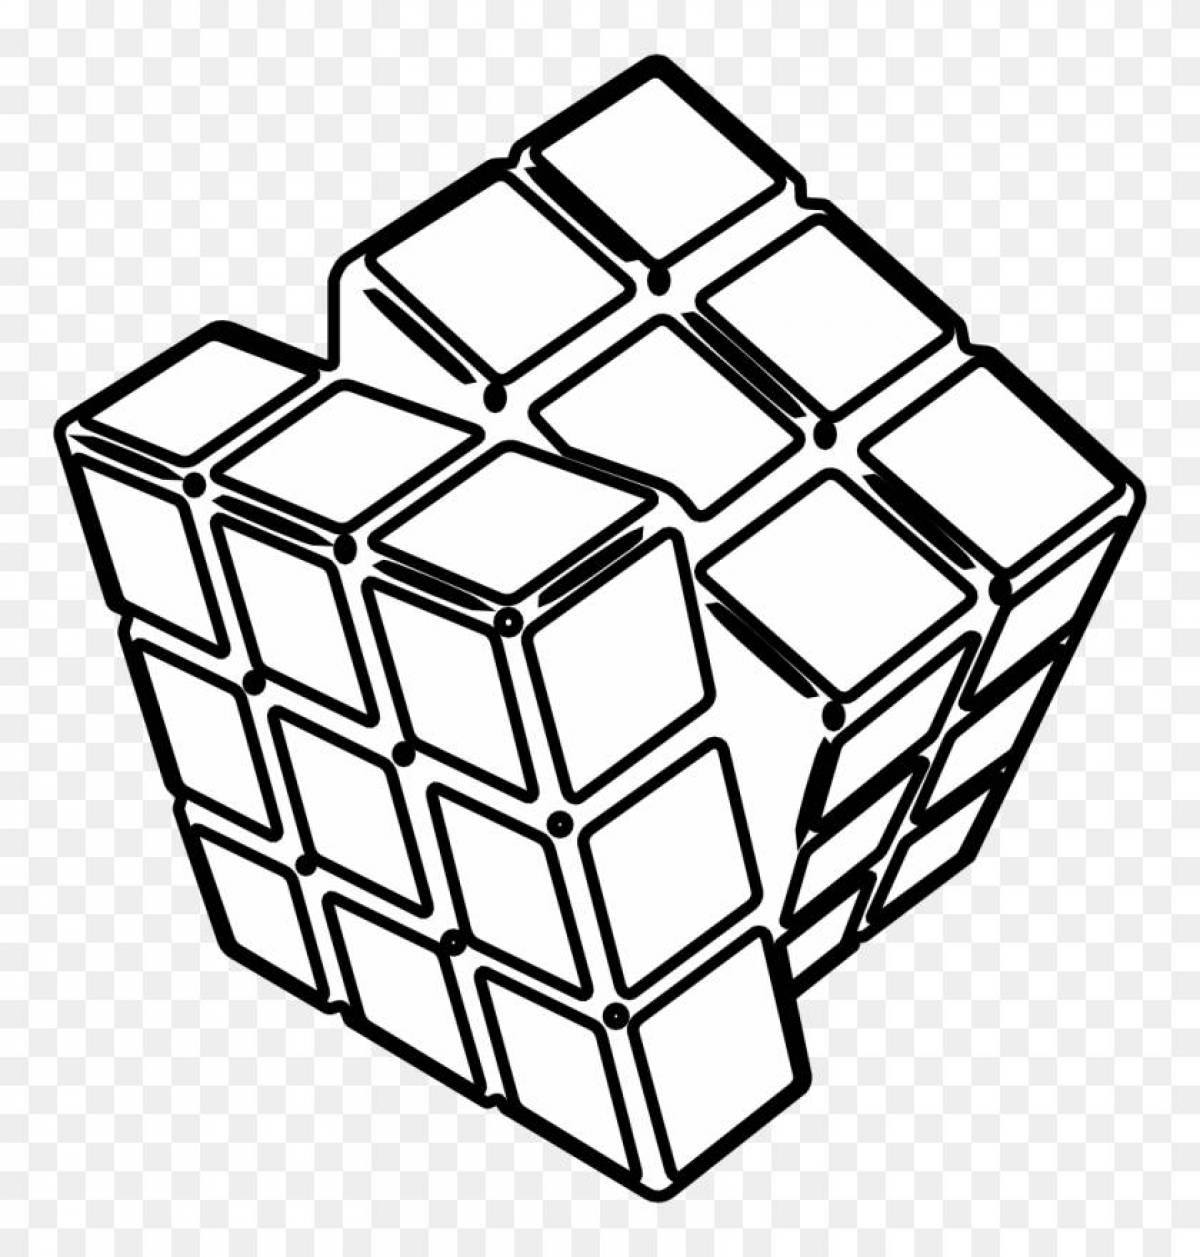 Coloring funny cubes